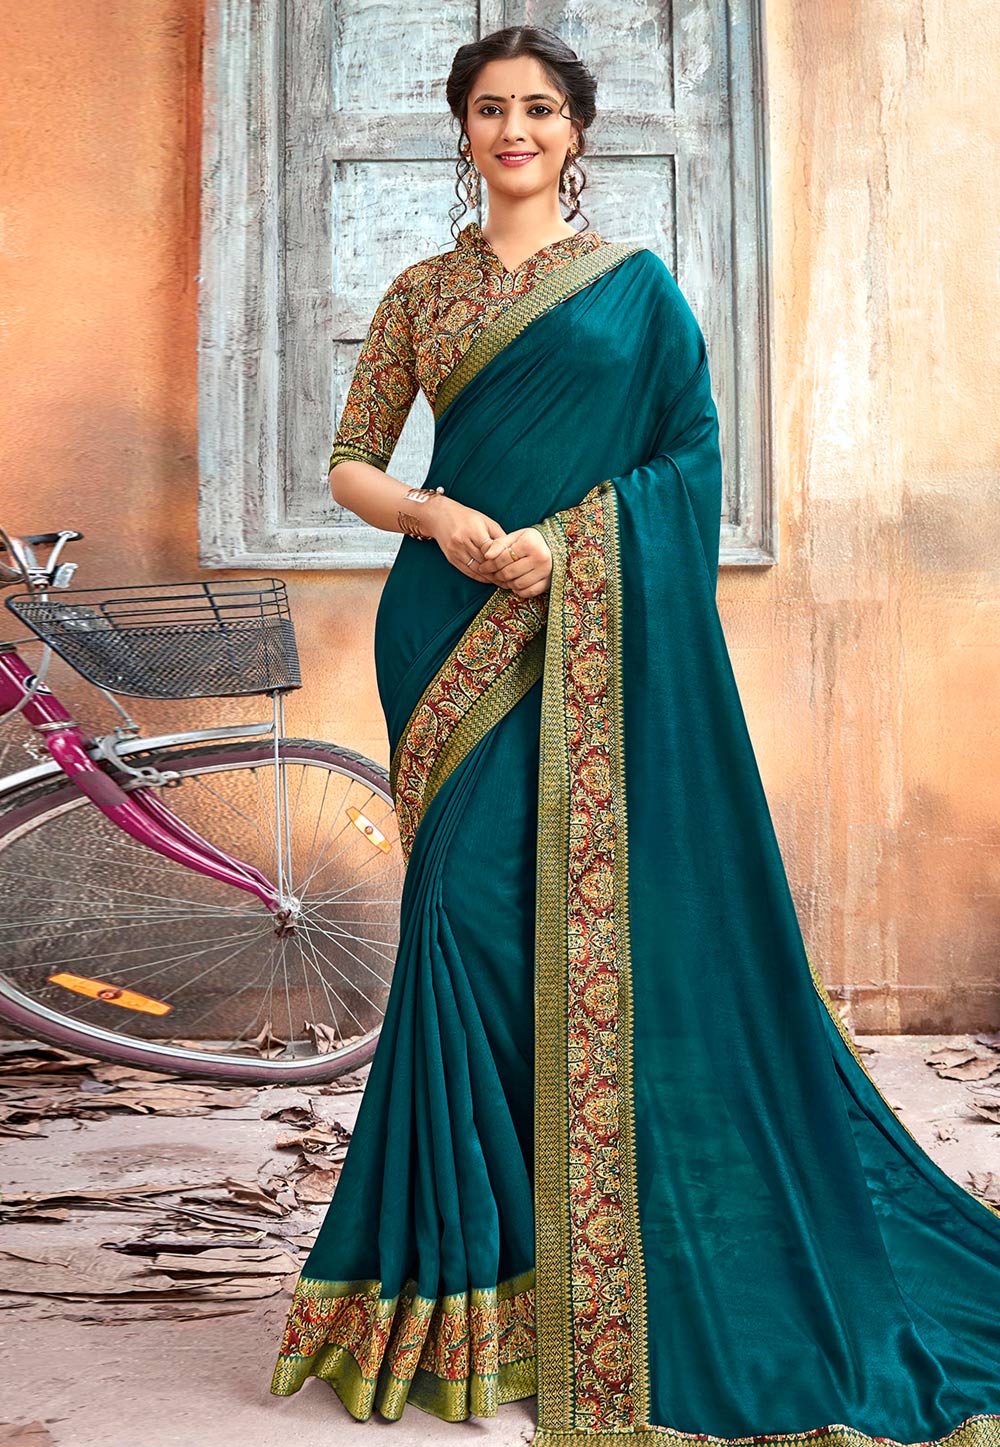 Teal Blue Chanderi Silk Saree With Blouse 200824